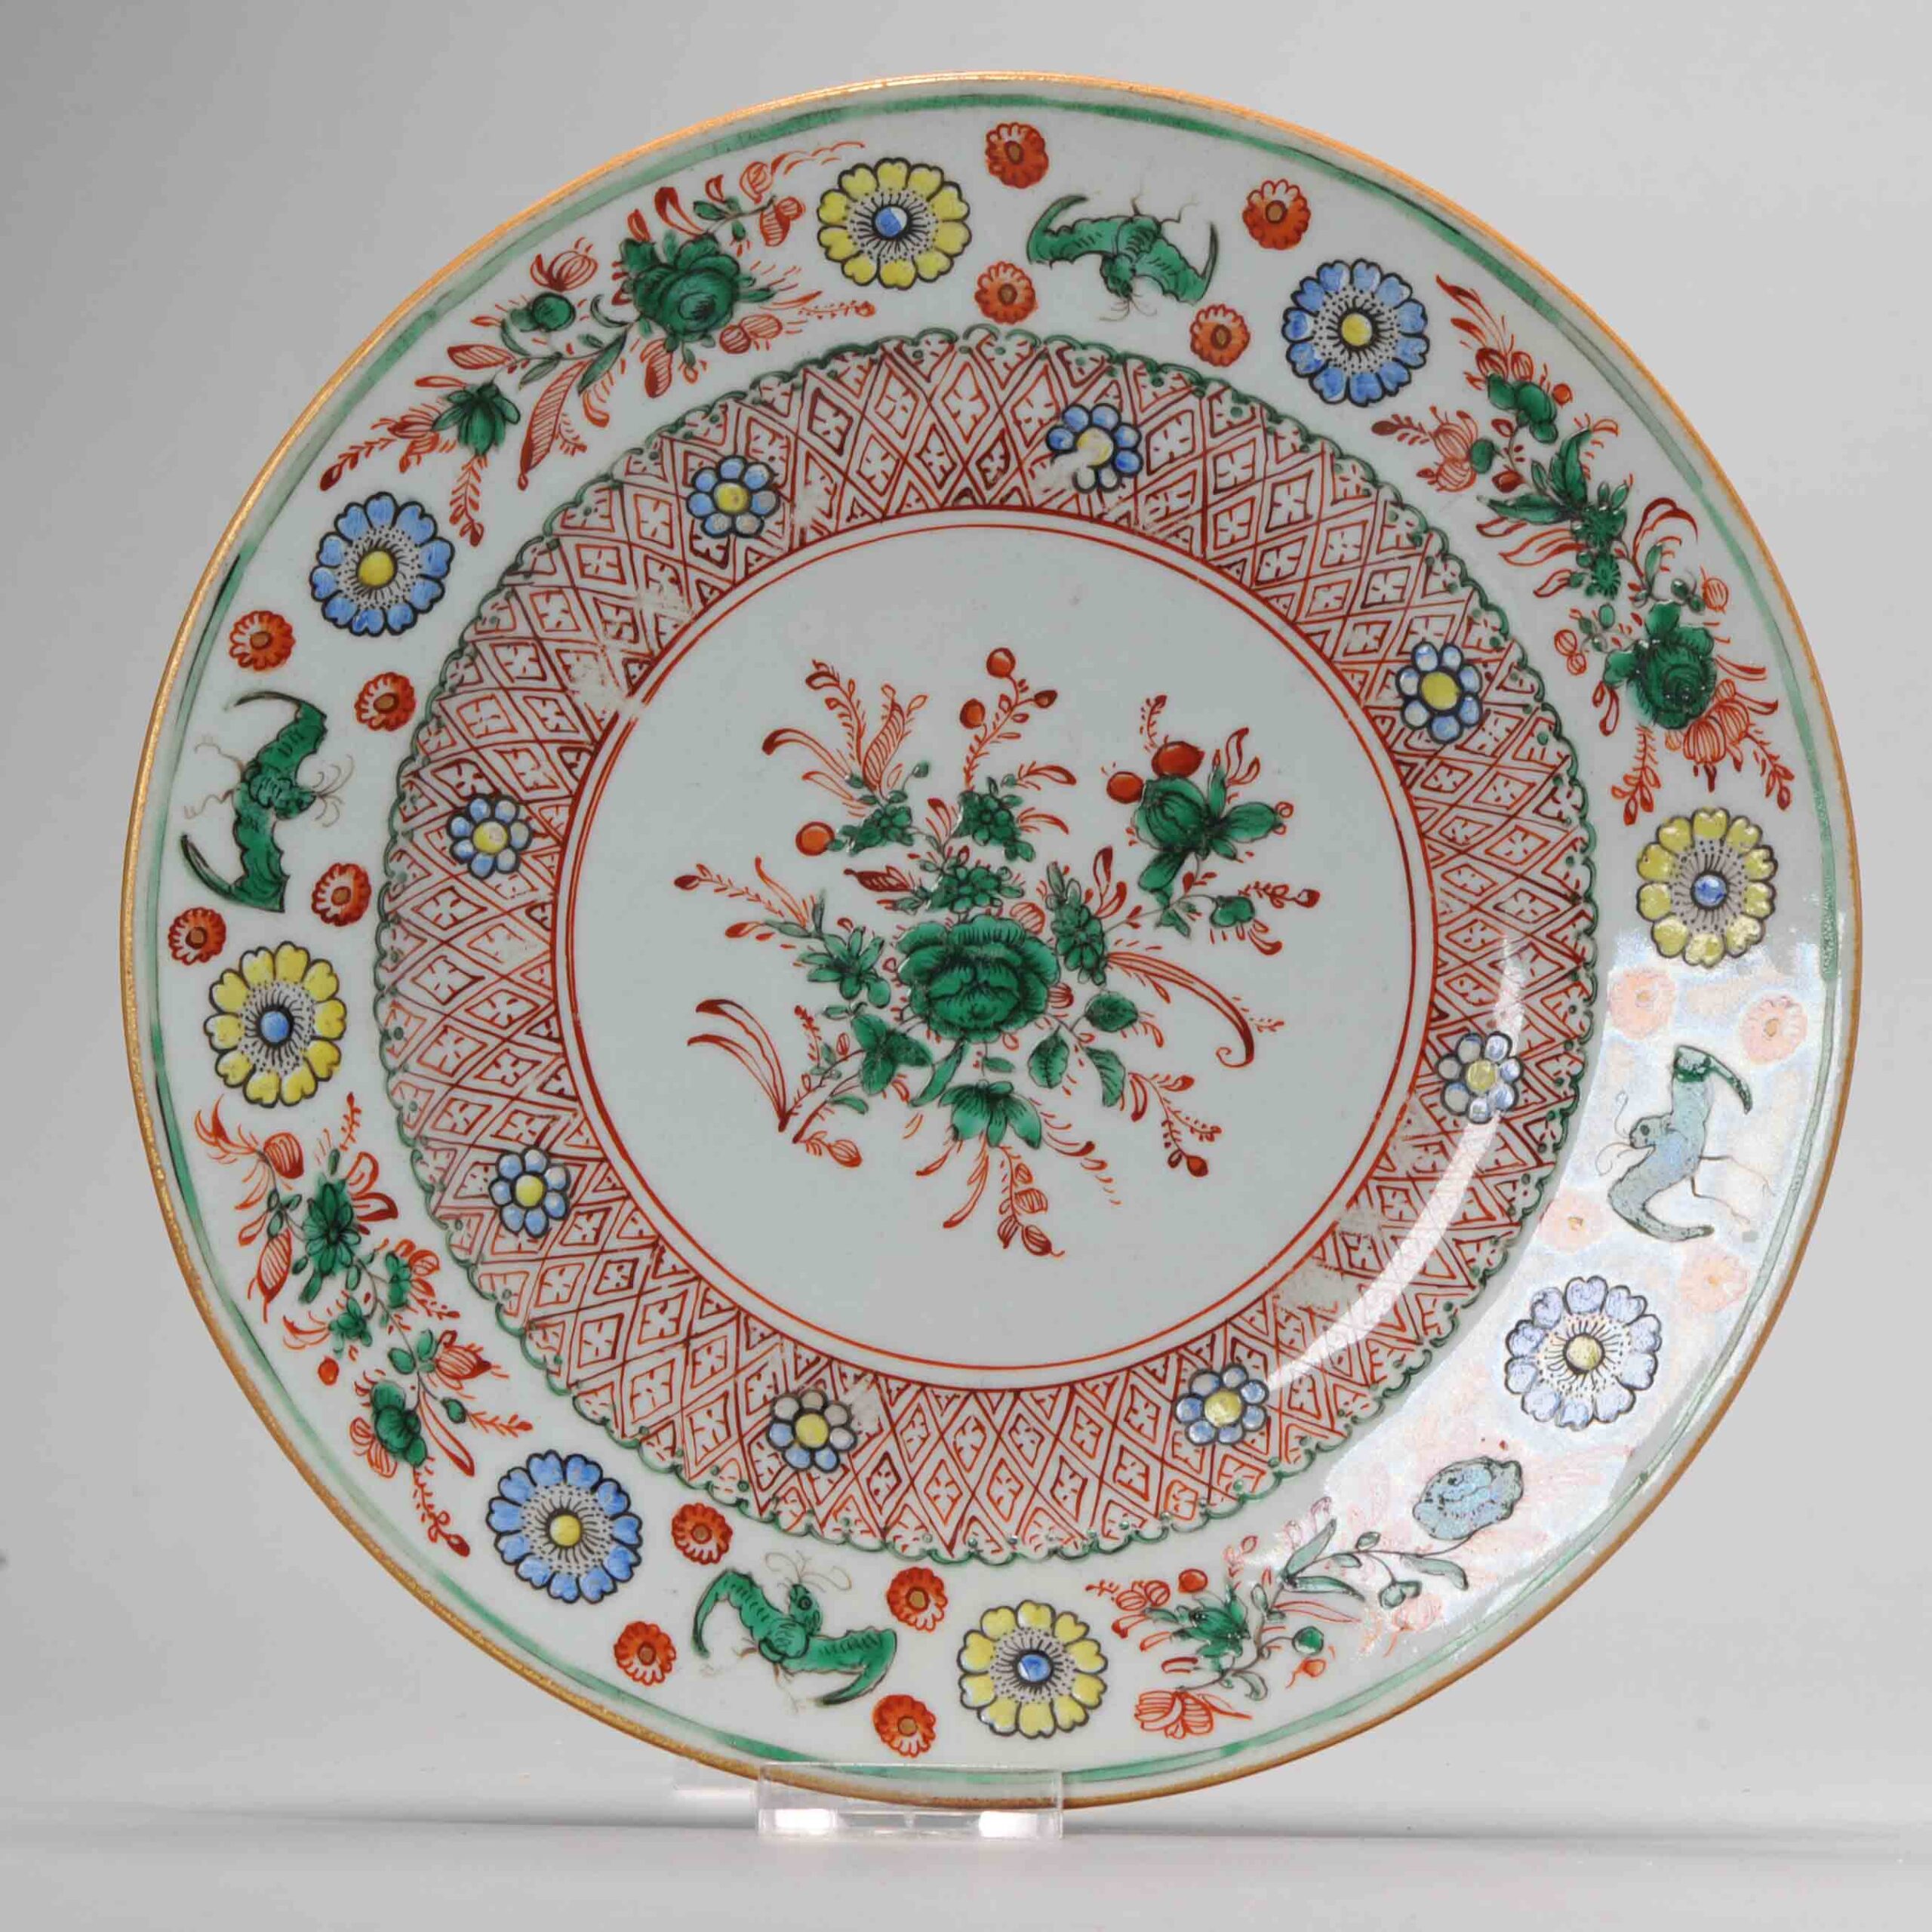 1086 Very nice decorated plate. Decorated with all overglaze colors. European Decorated?